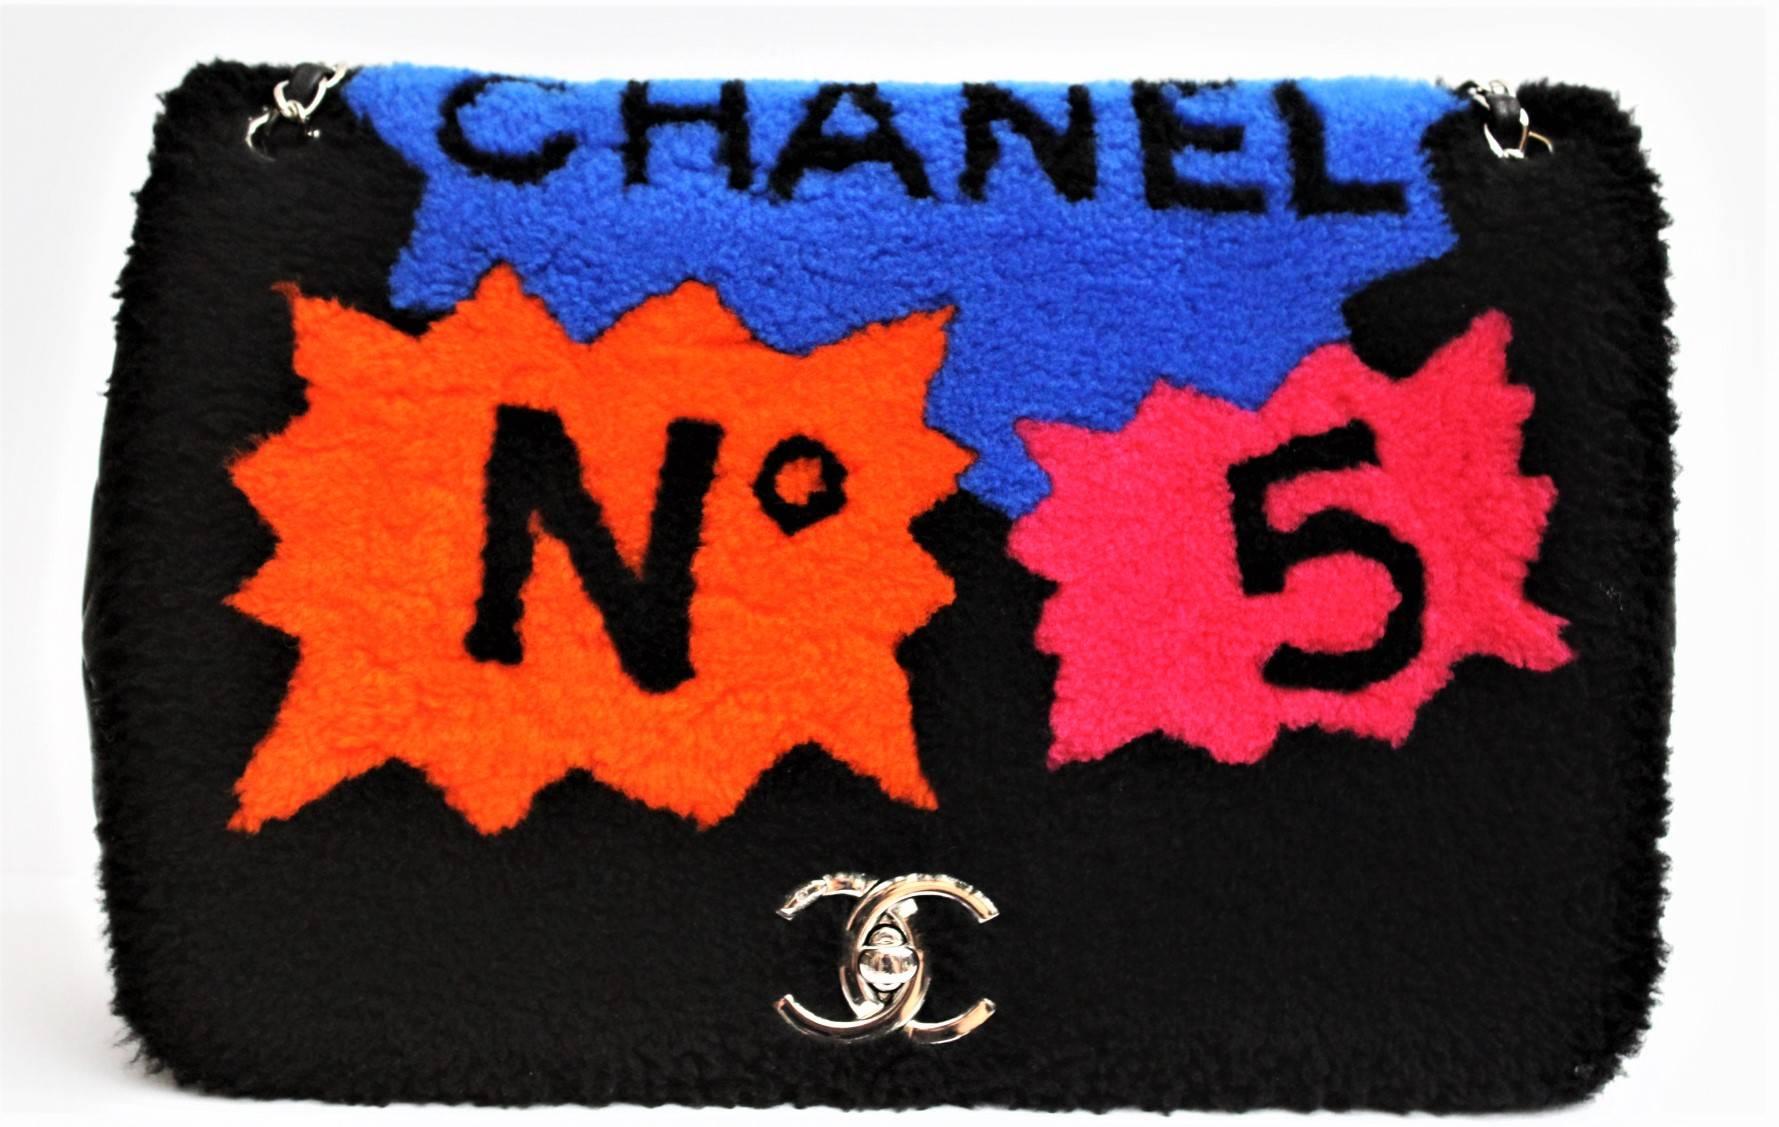 This limited edition beauty from Chanel first made its debut in the 2014 Runway Collection and it features black and multicolor shearling with the famous Chanel No. 5 design on the flap, silver tone hardware CC lock and chain-link shoulder strap